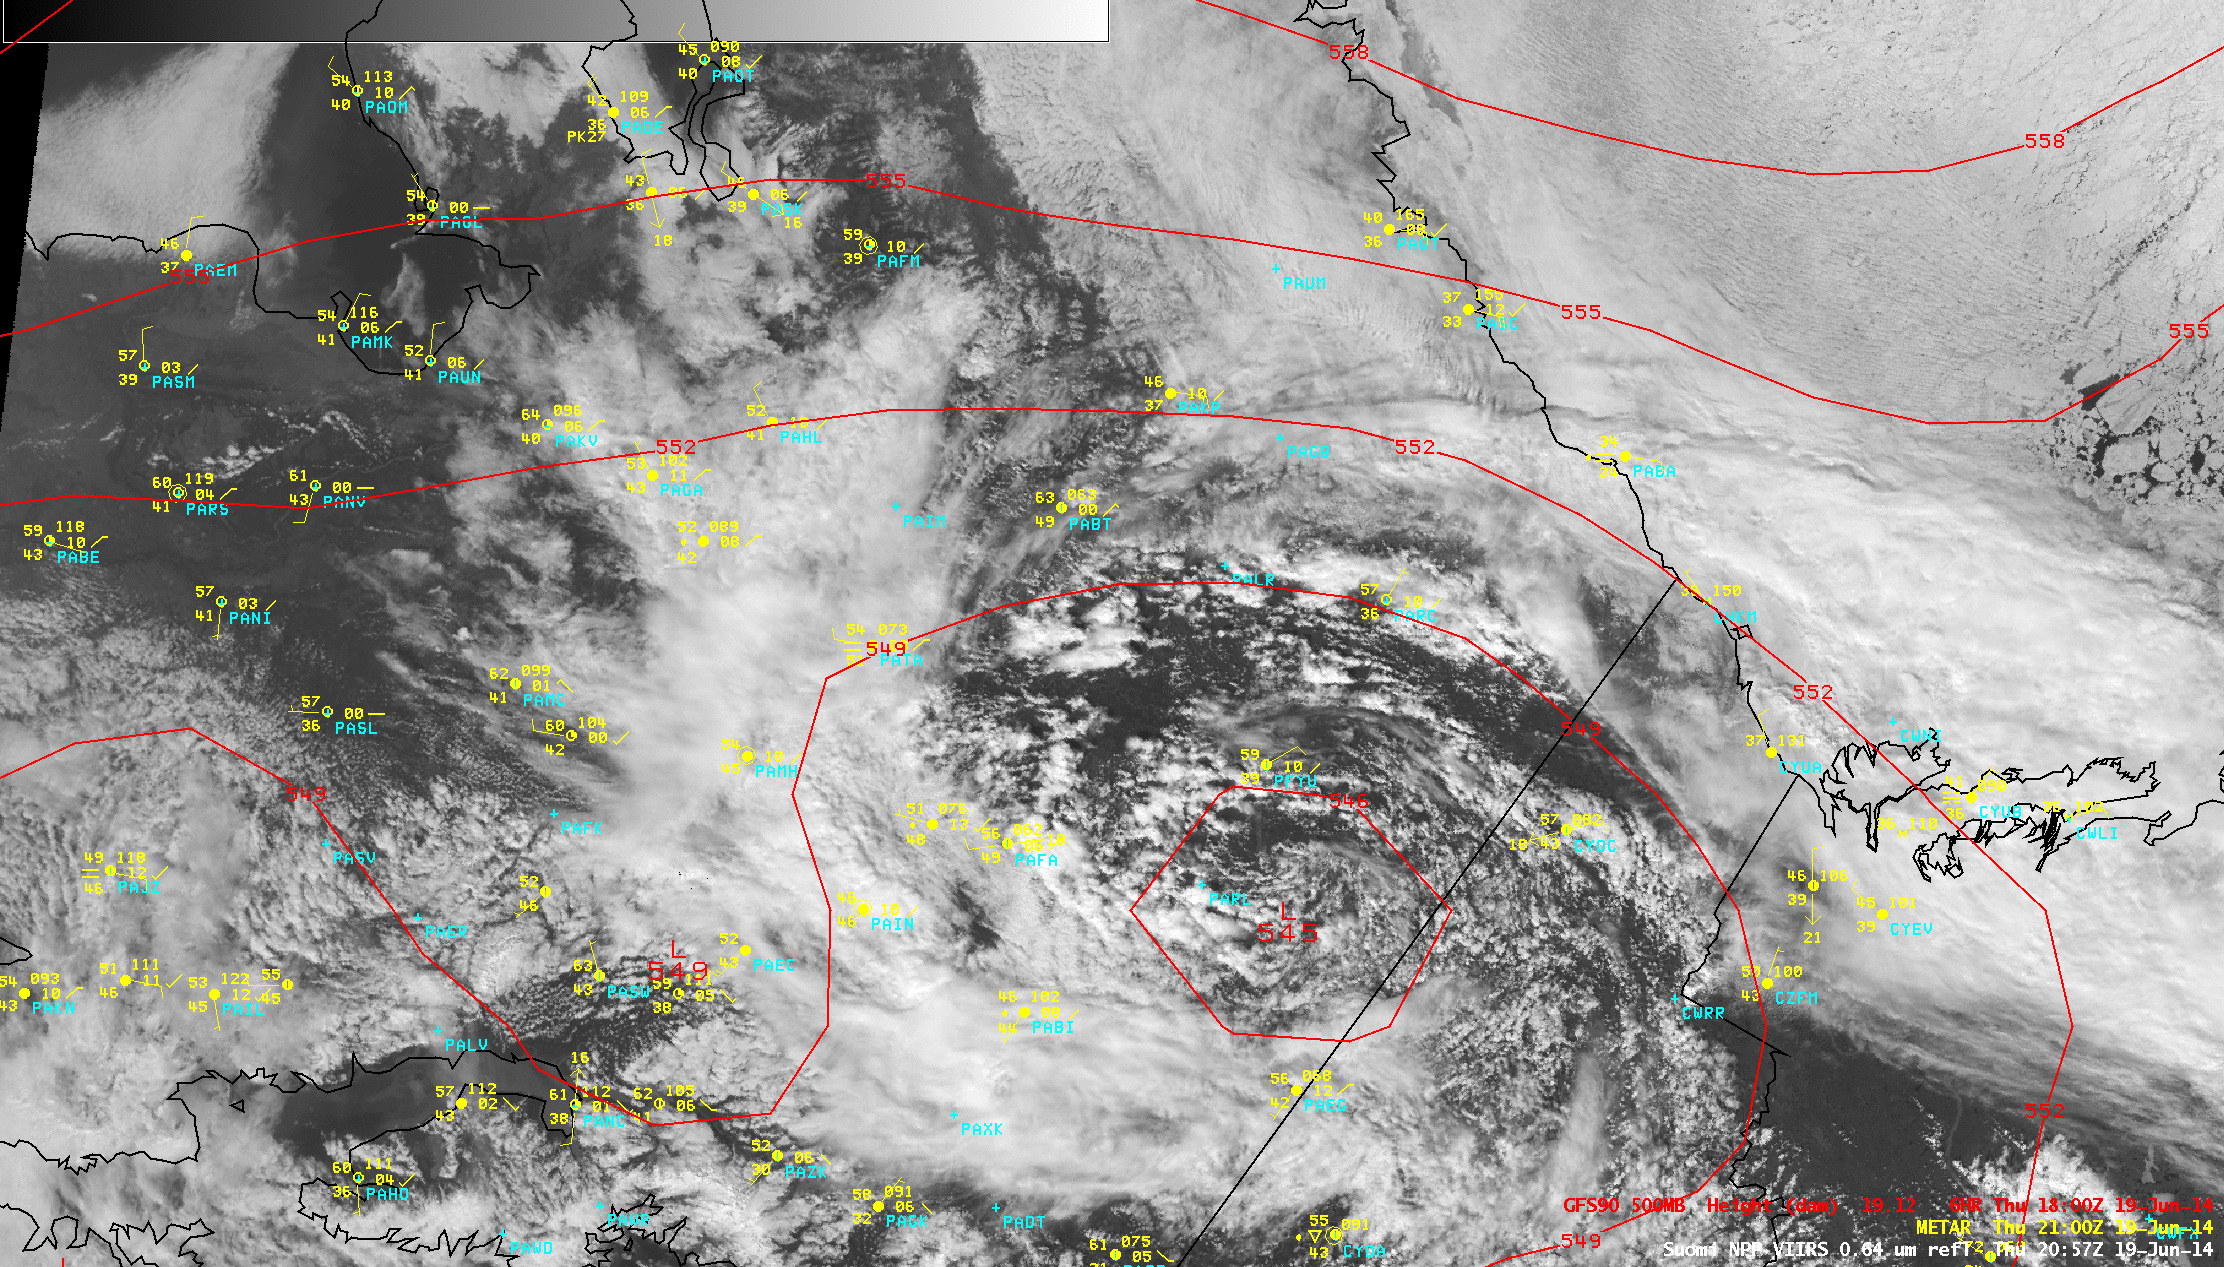 Suomi NPP VIIRS 0.64 µm visible channel images, with contours of GFS90 500 hPa geopotential height